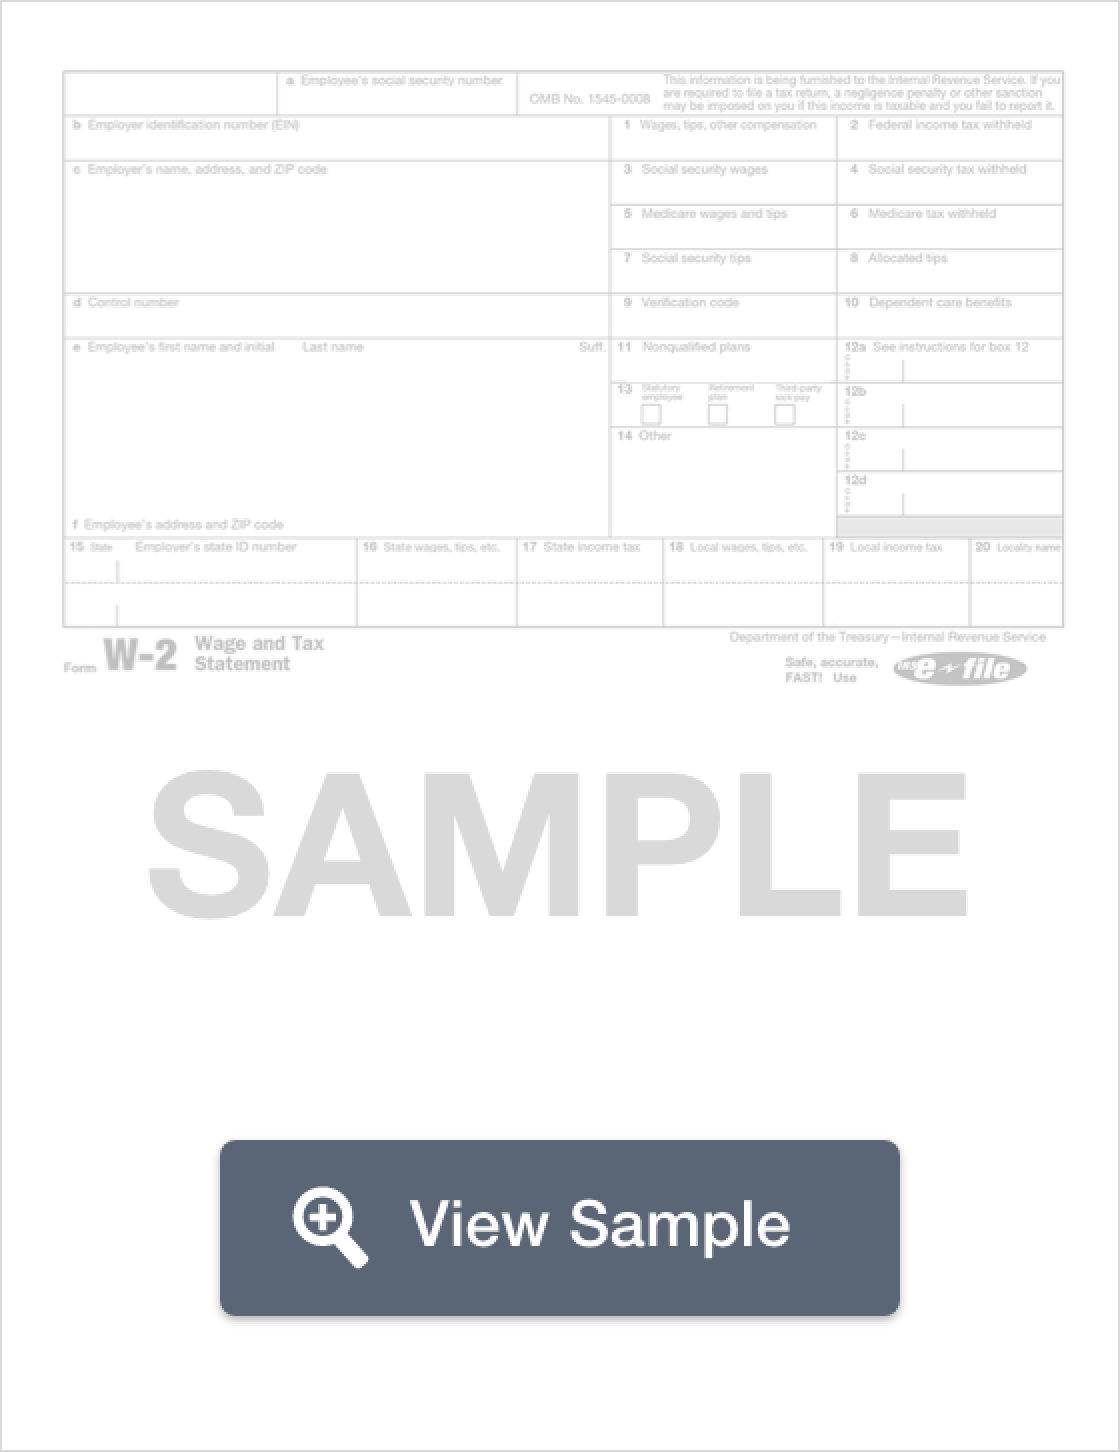 Copy A Only Designed for QuickBooks and Accounting Software 100 Forms 50 Sheets, 2 Forms Per Sheet 2020 Tax Forms for Reporting Employee Wages Blue Summit Supplies 100 W2 Forms 